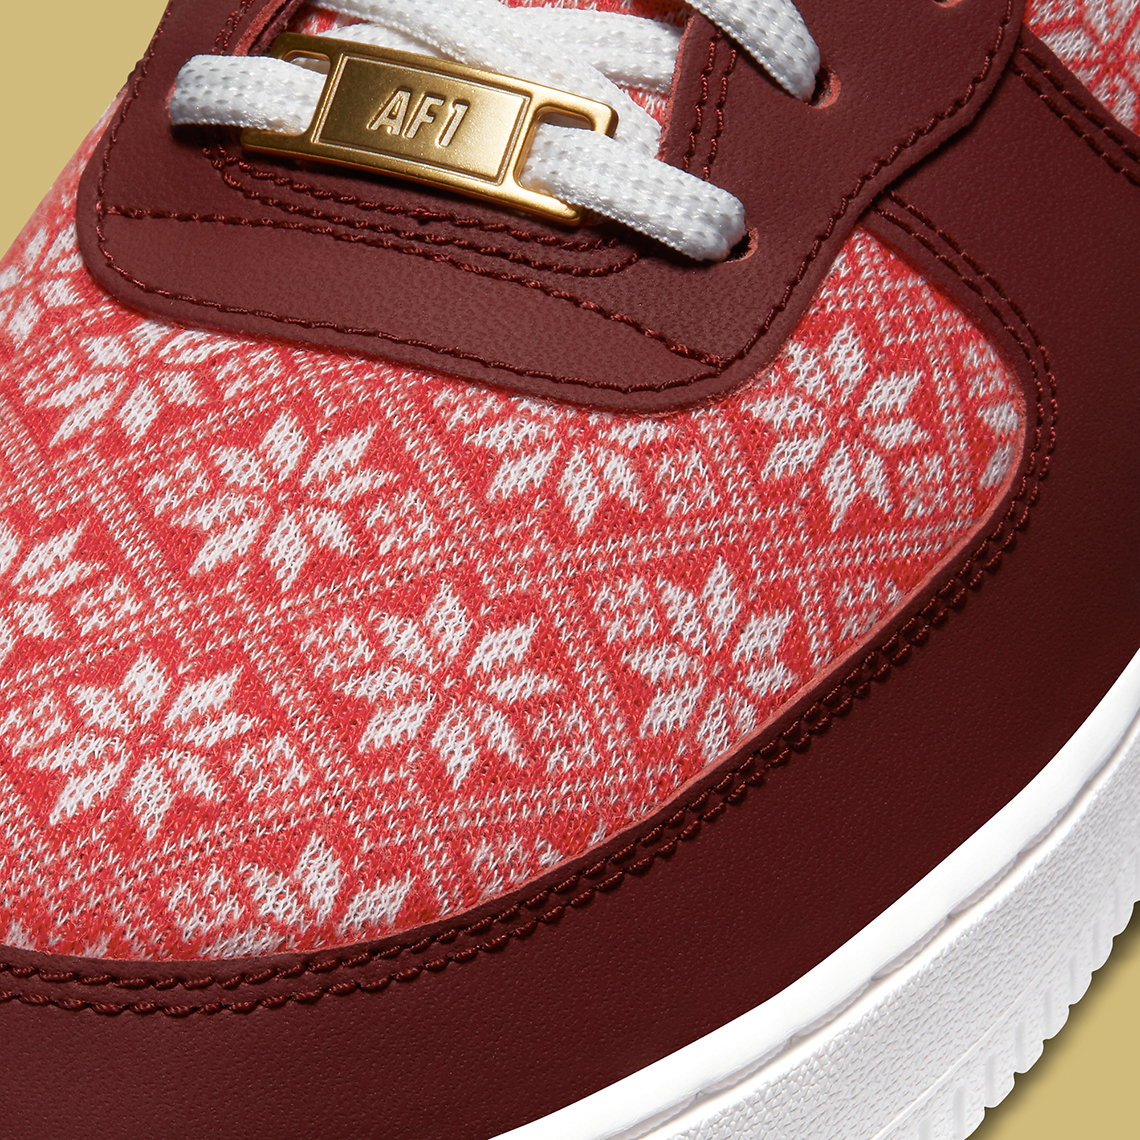 Nike's Feeling Festive With The Air Force 1 High Utility 2.0 Christmas -  Sneaker News